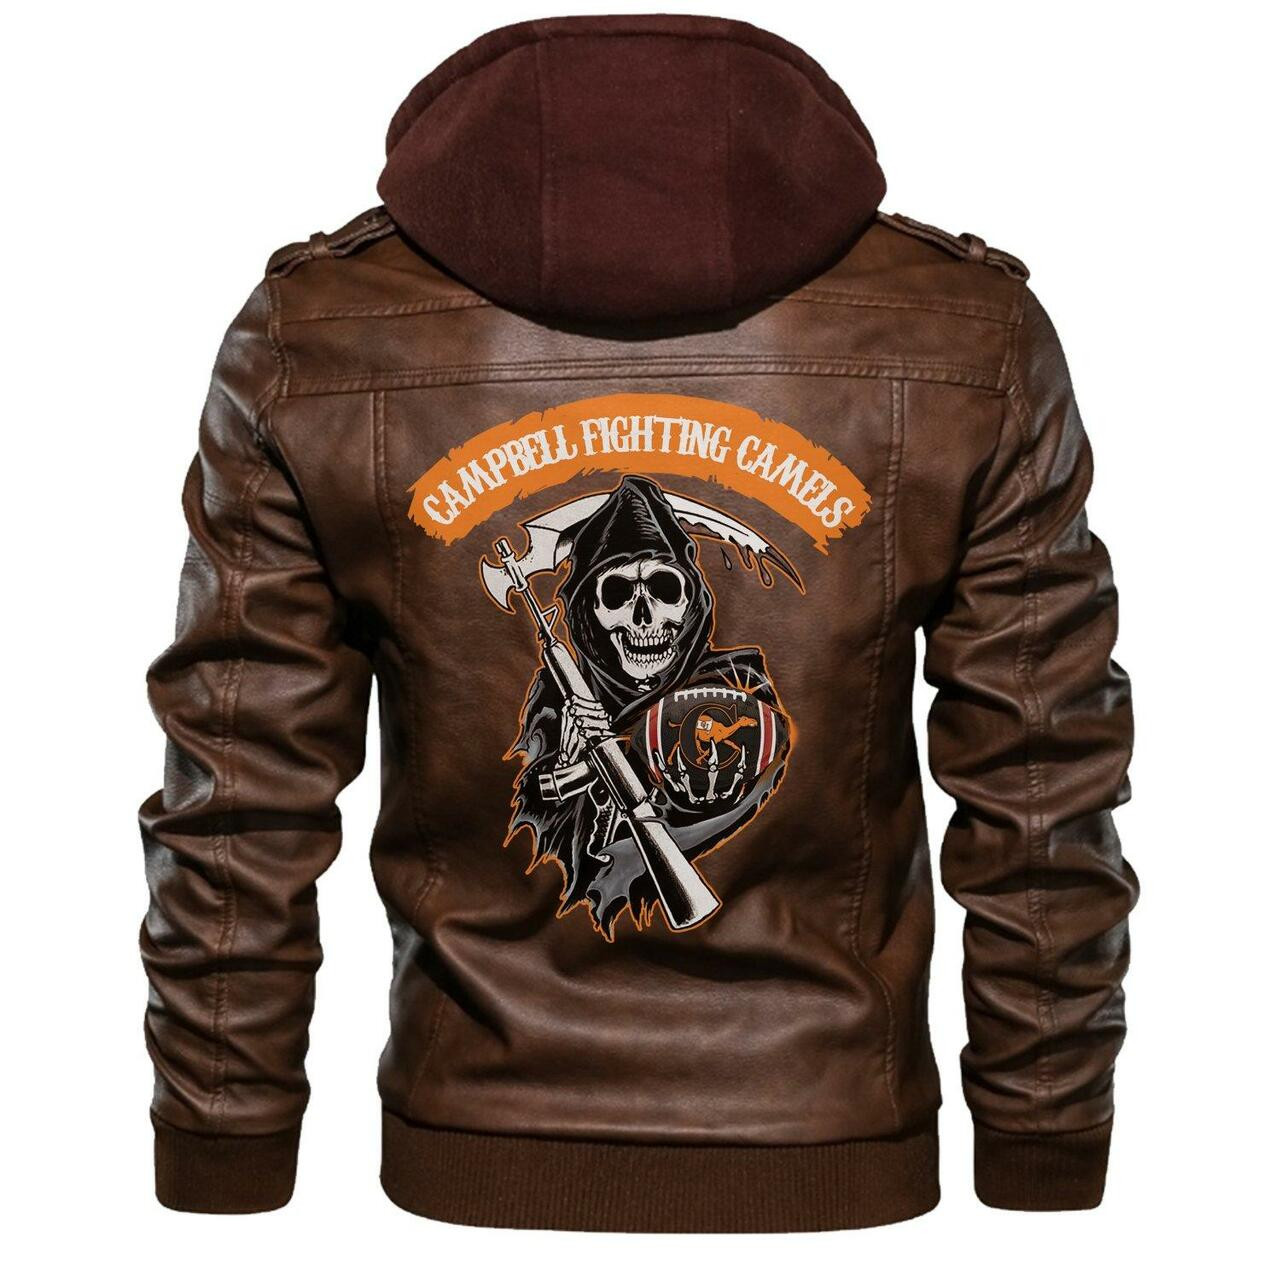 Are you looking for a great leather jacket? 144